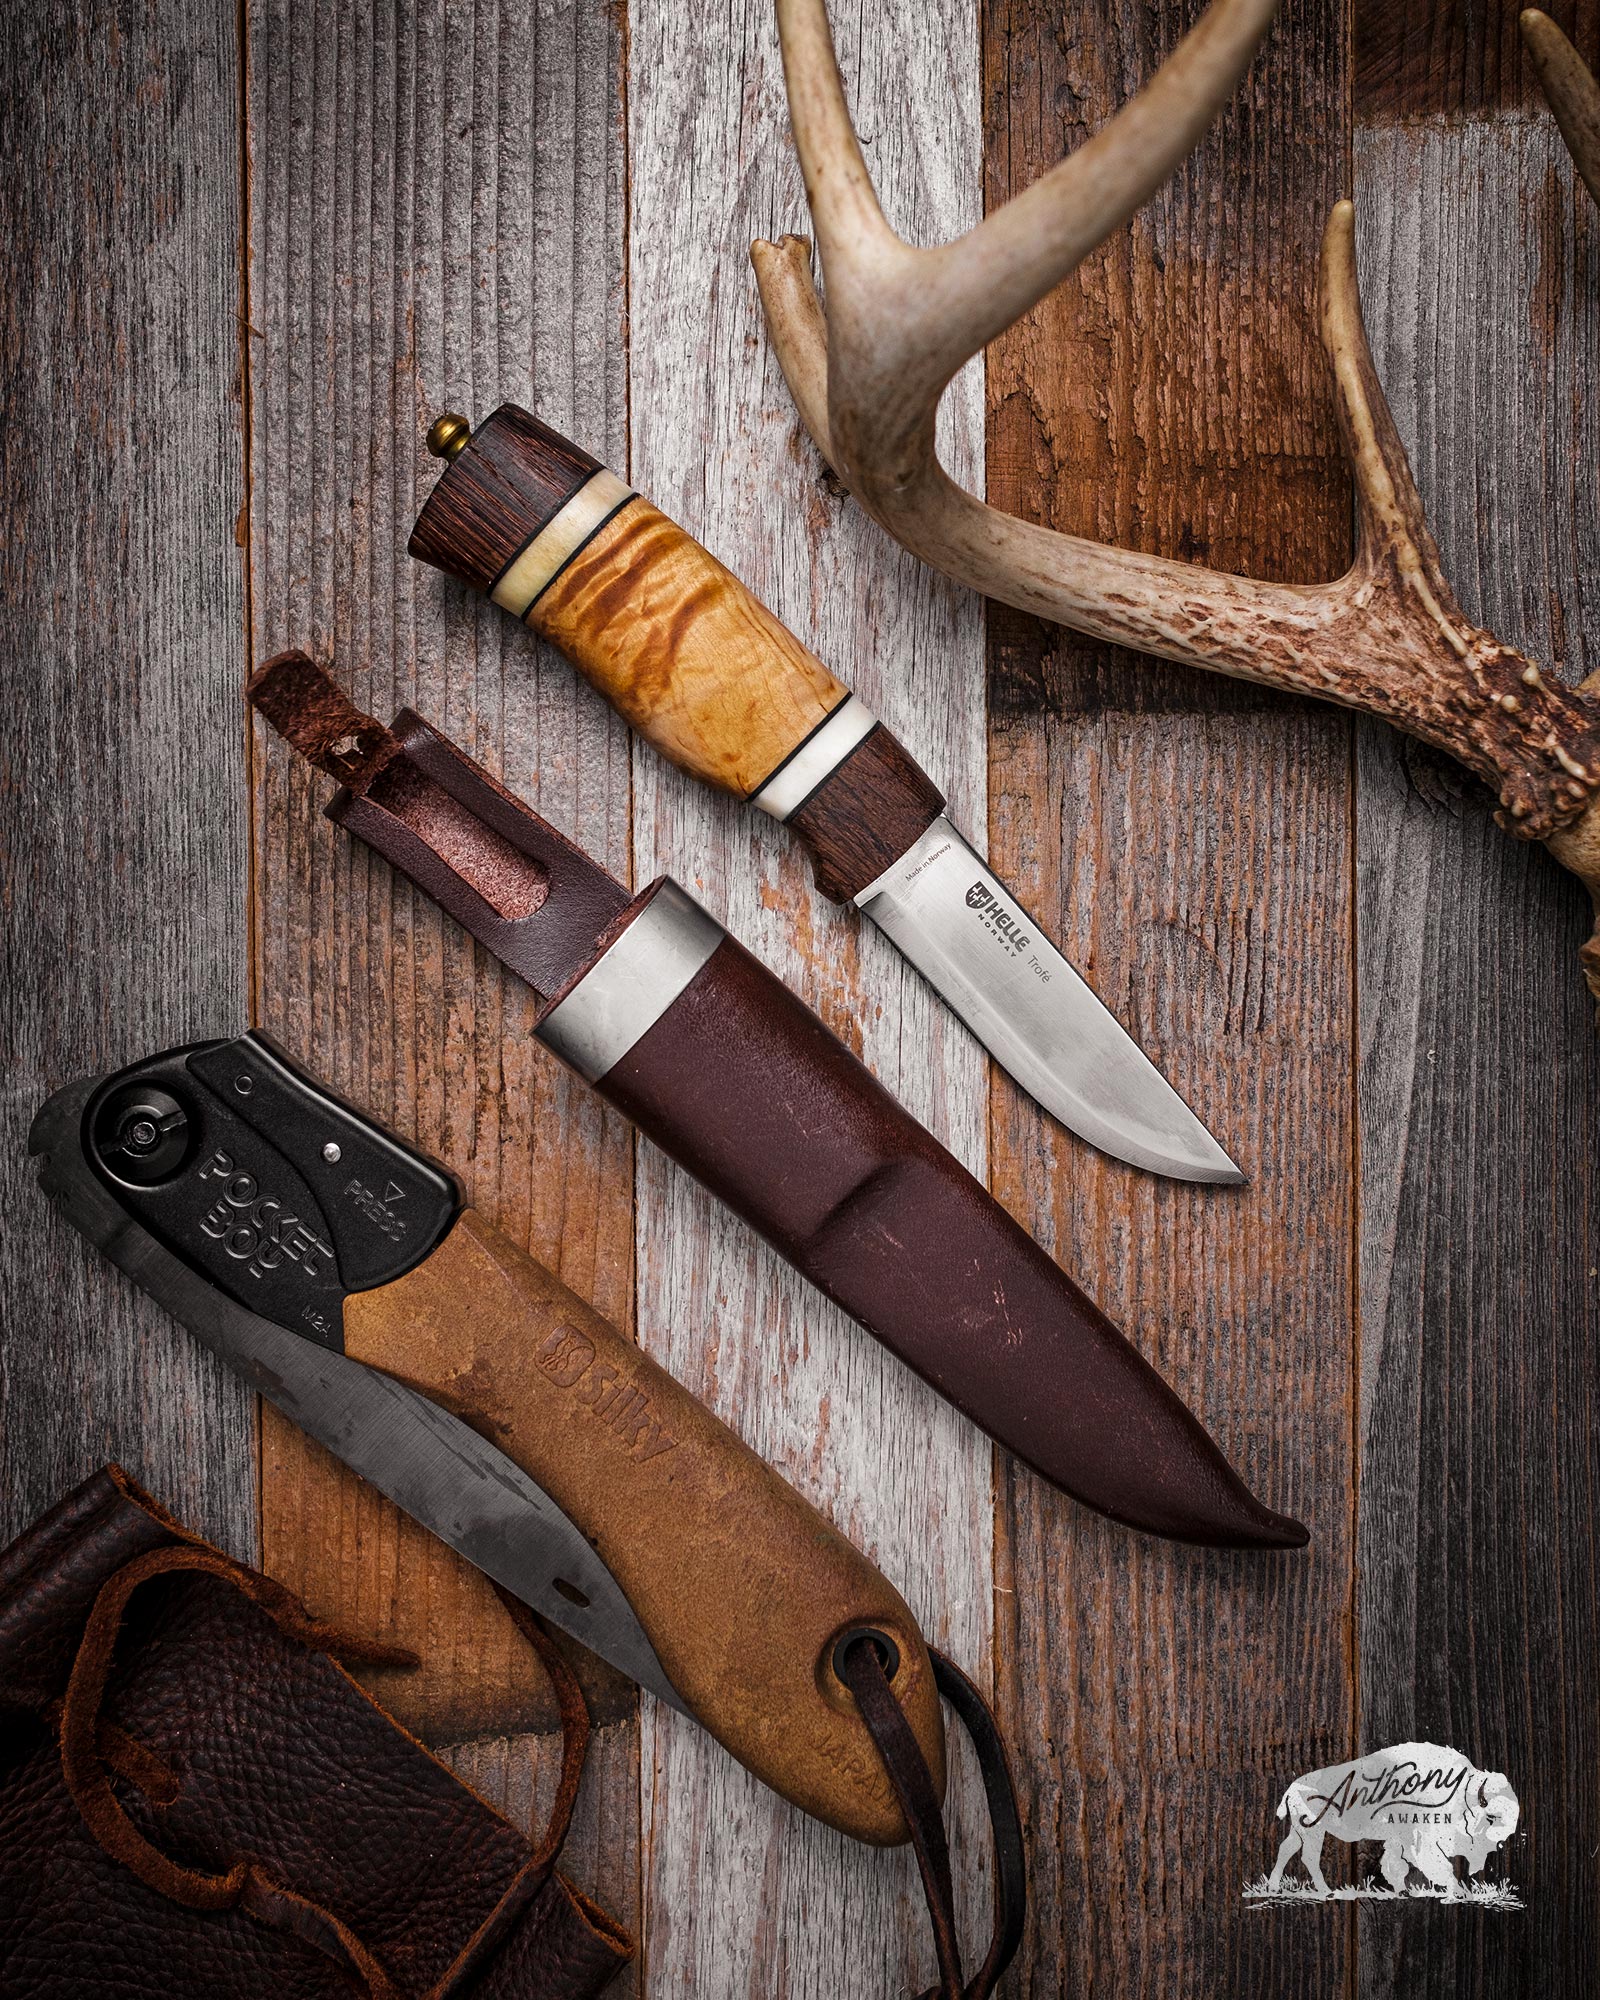 Helle Eggen Knife (Review & Buying Guide) 2021 - Task & Purpose